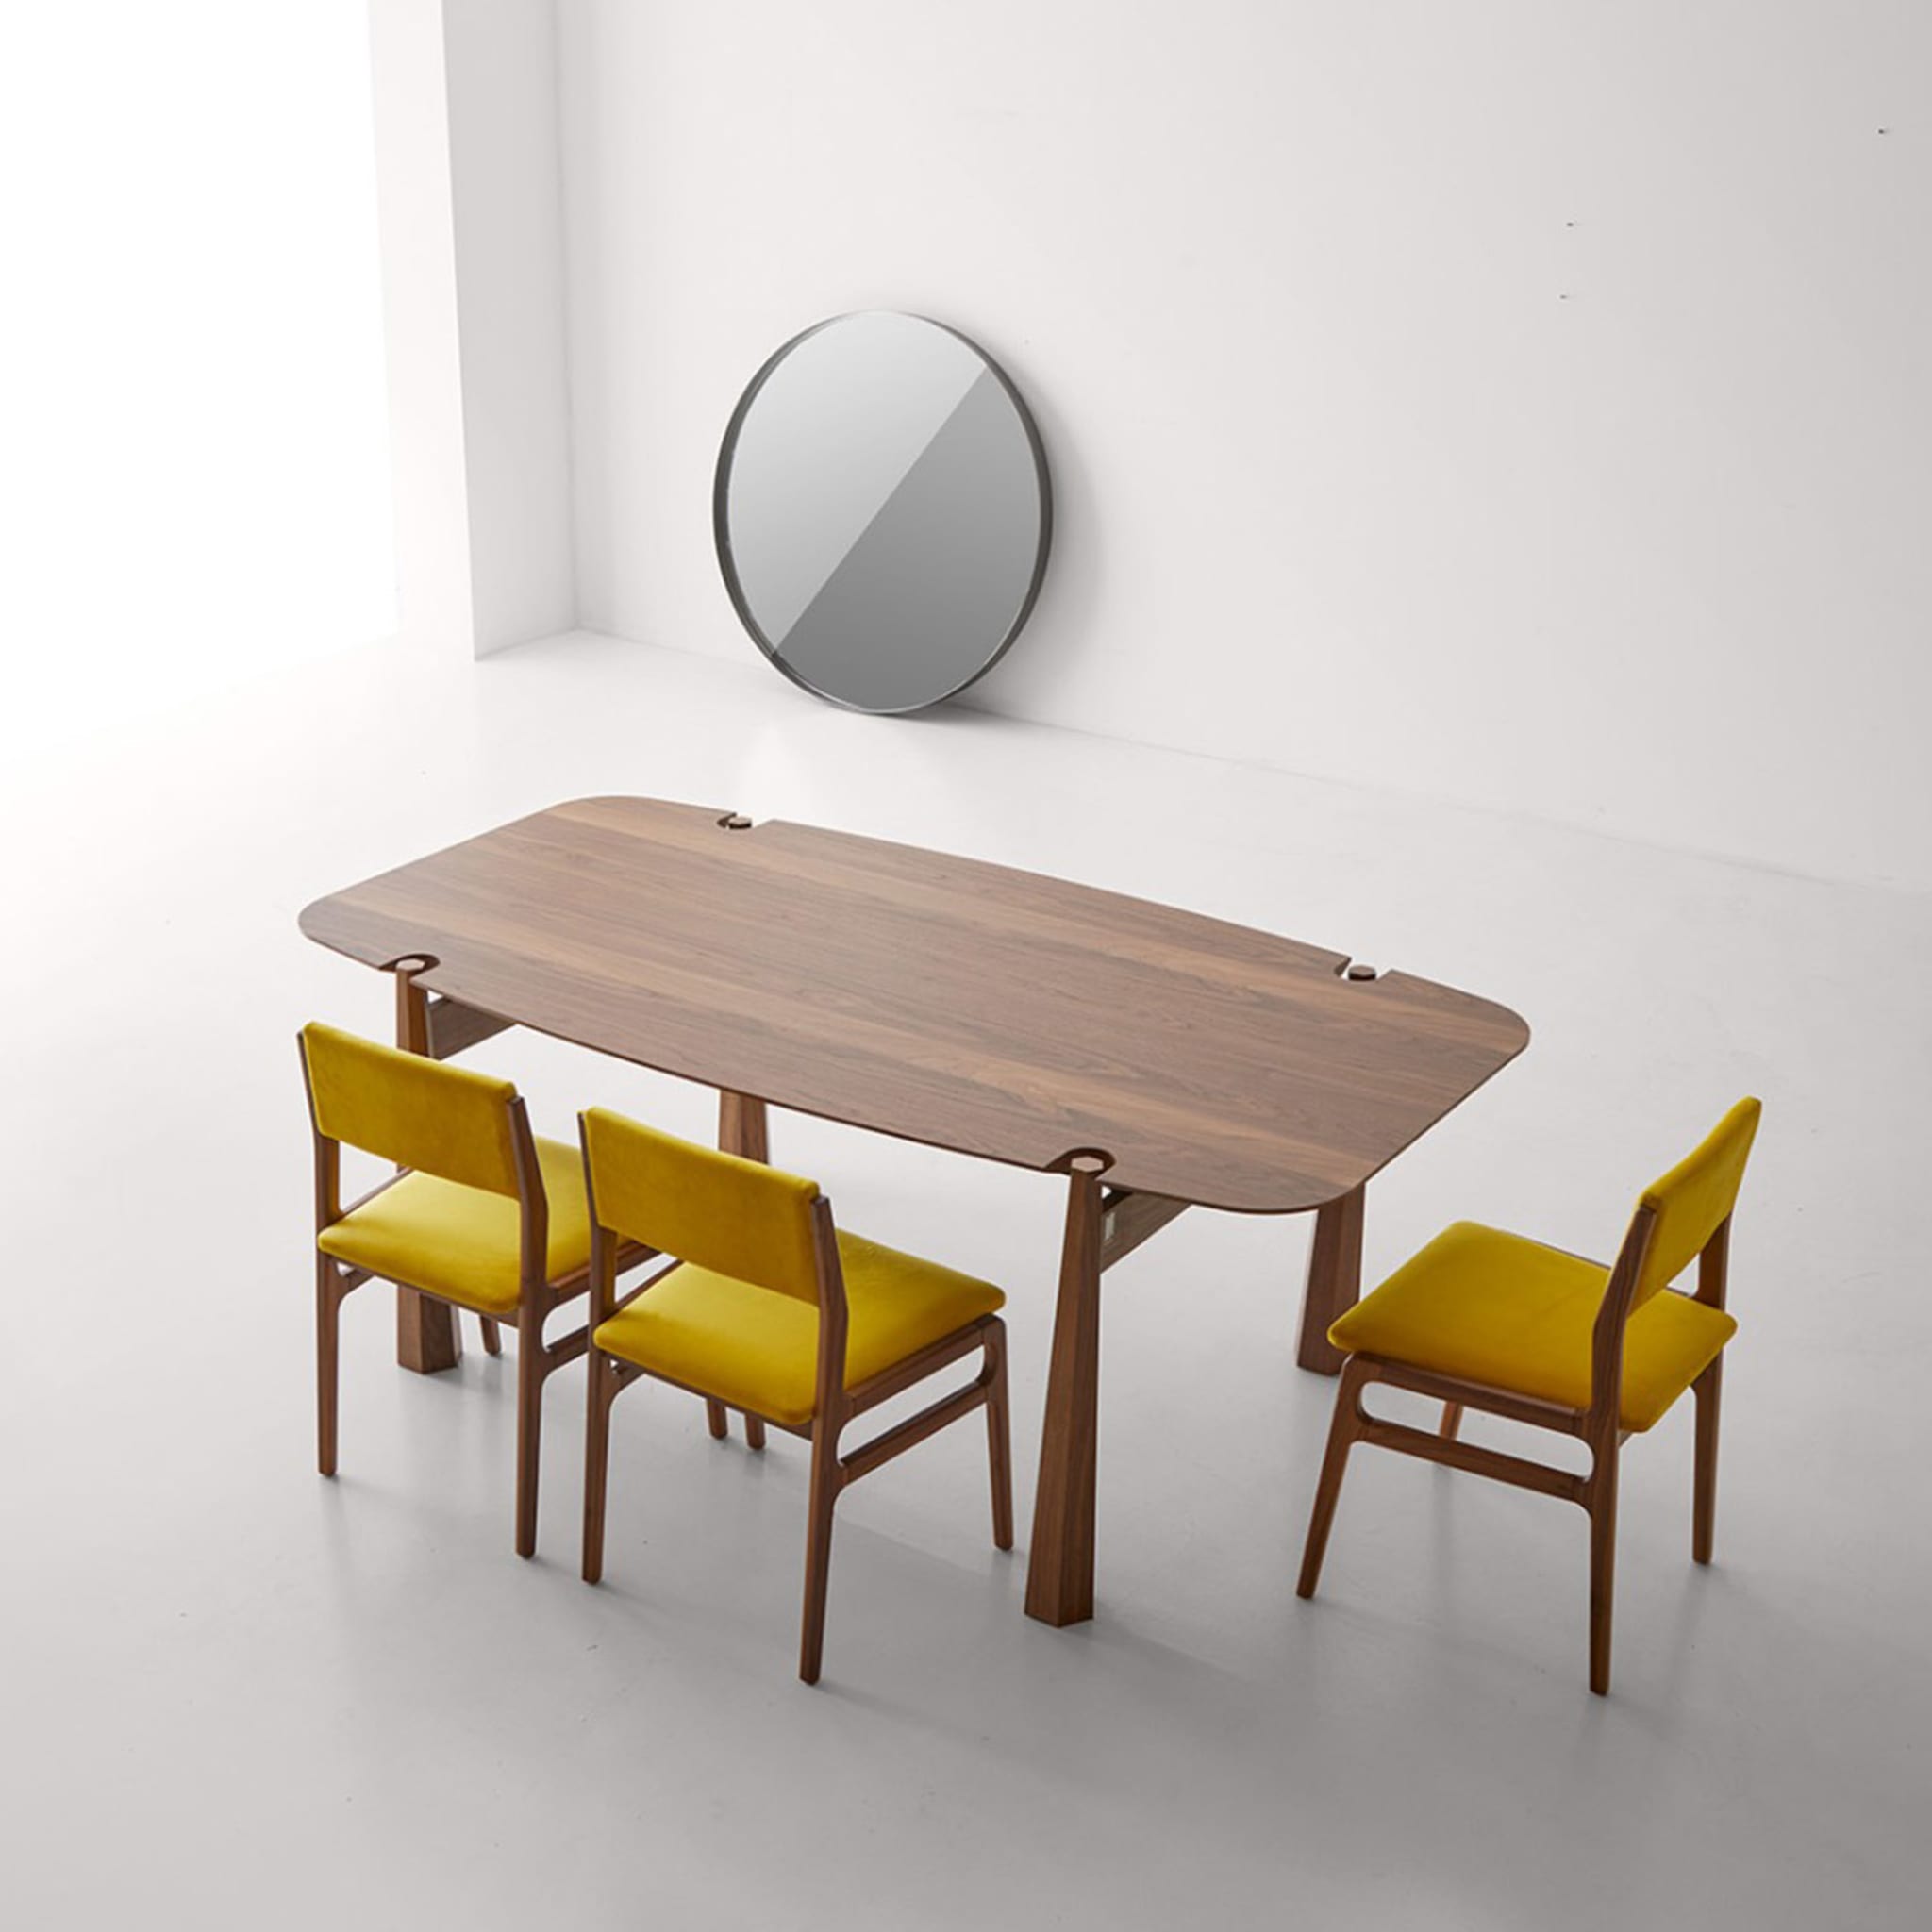 York Canaletto Wood Table - Alternative view 5